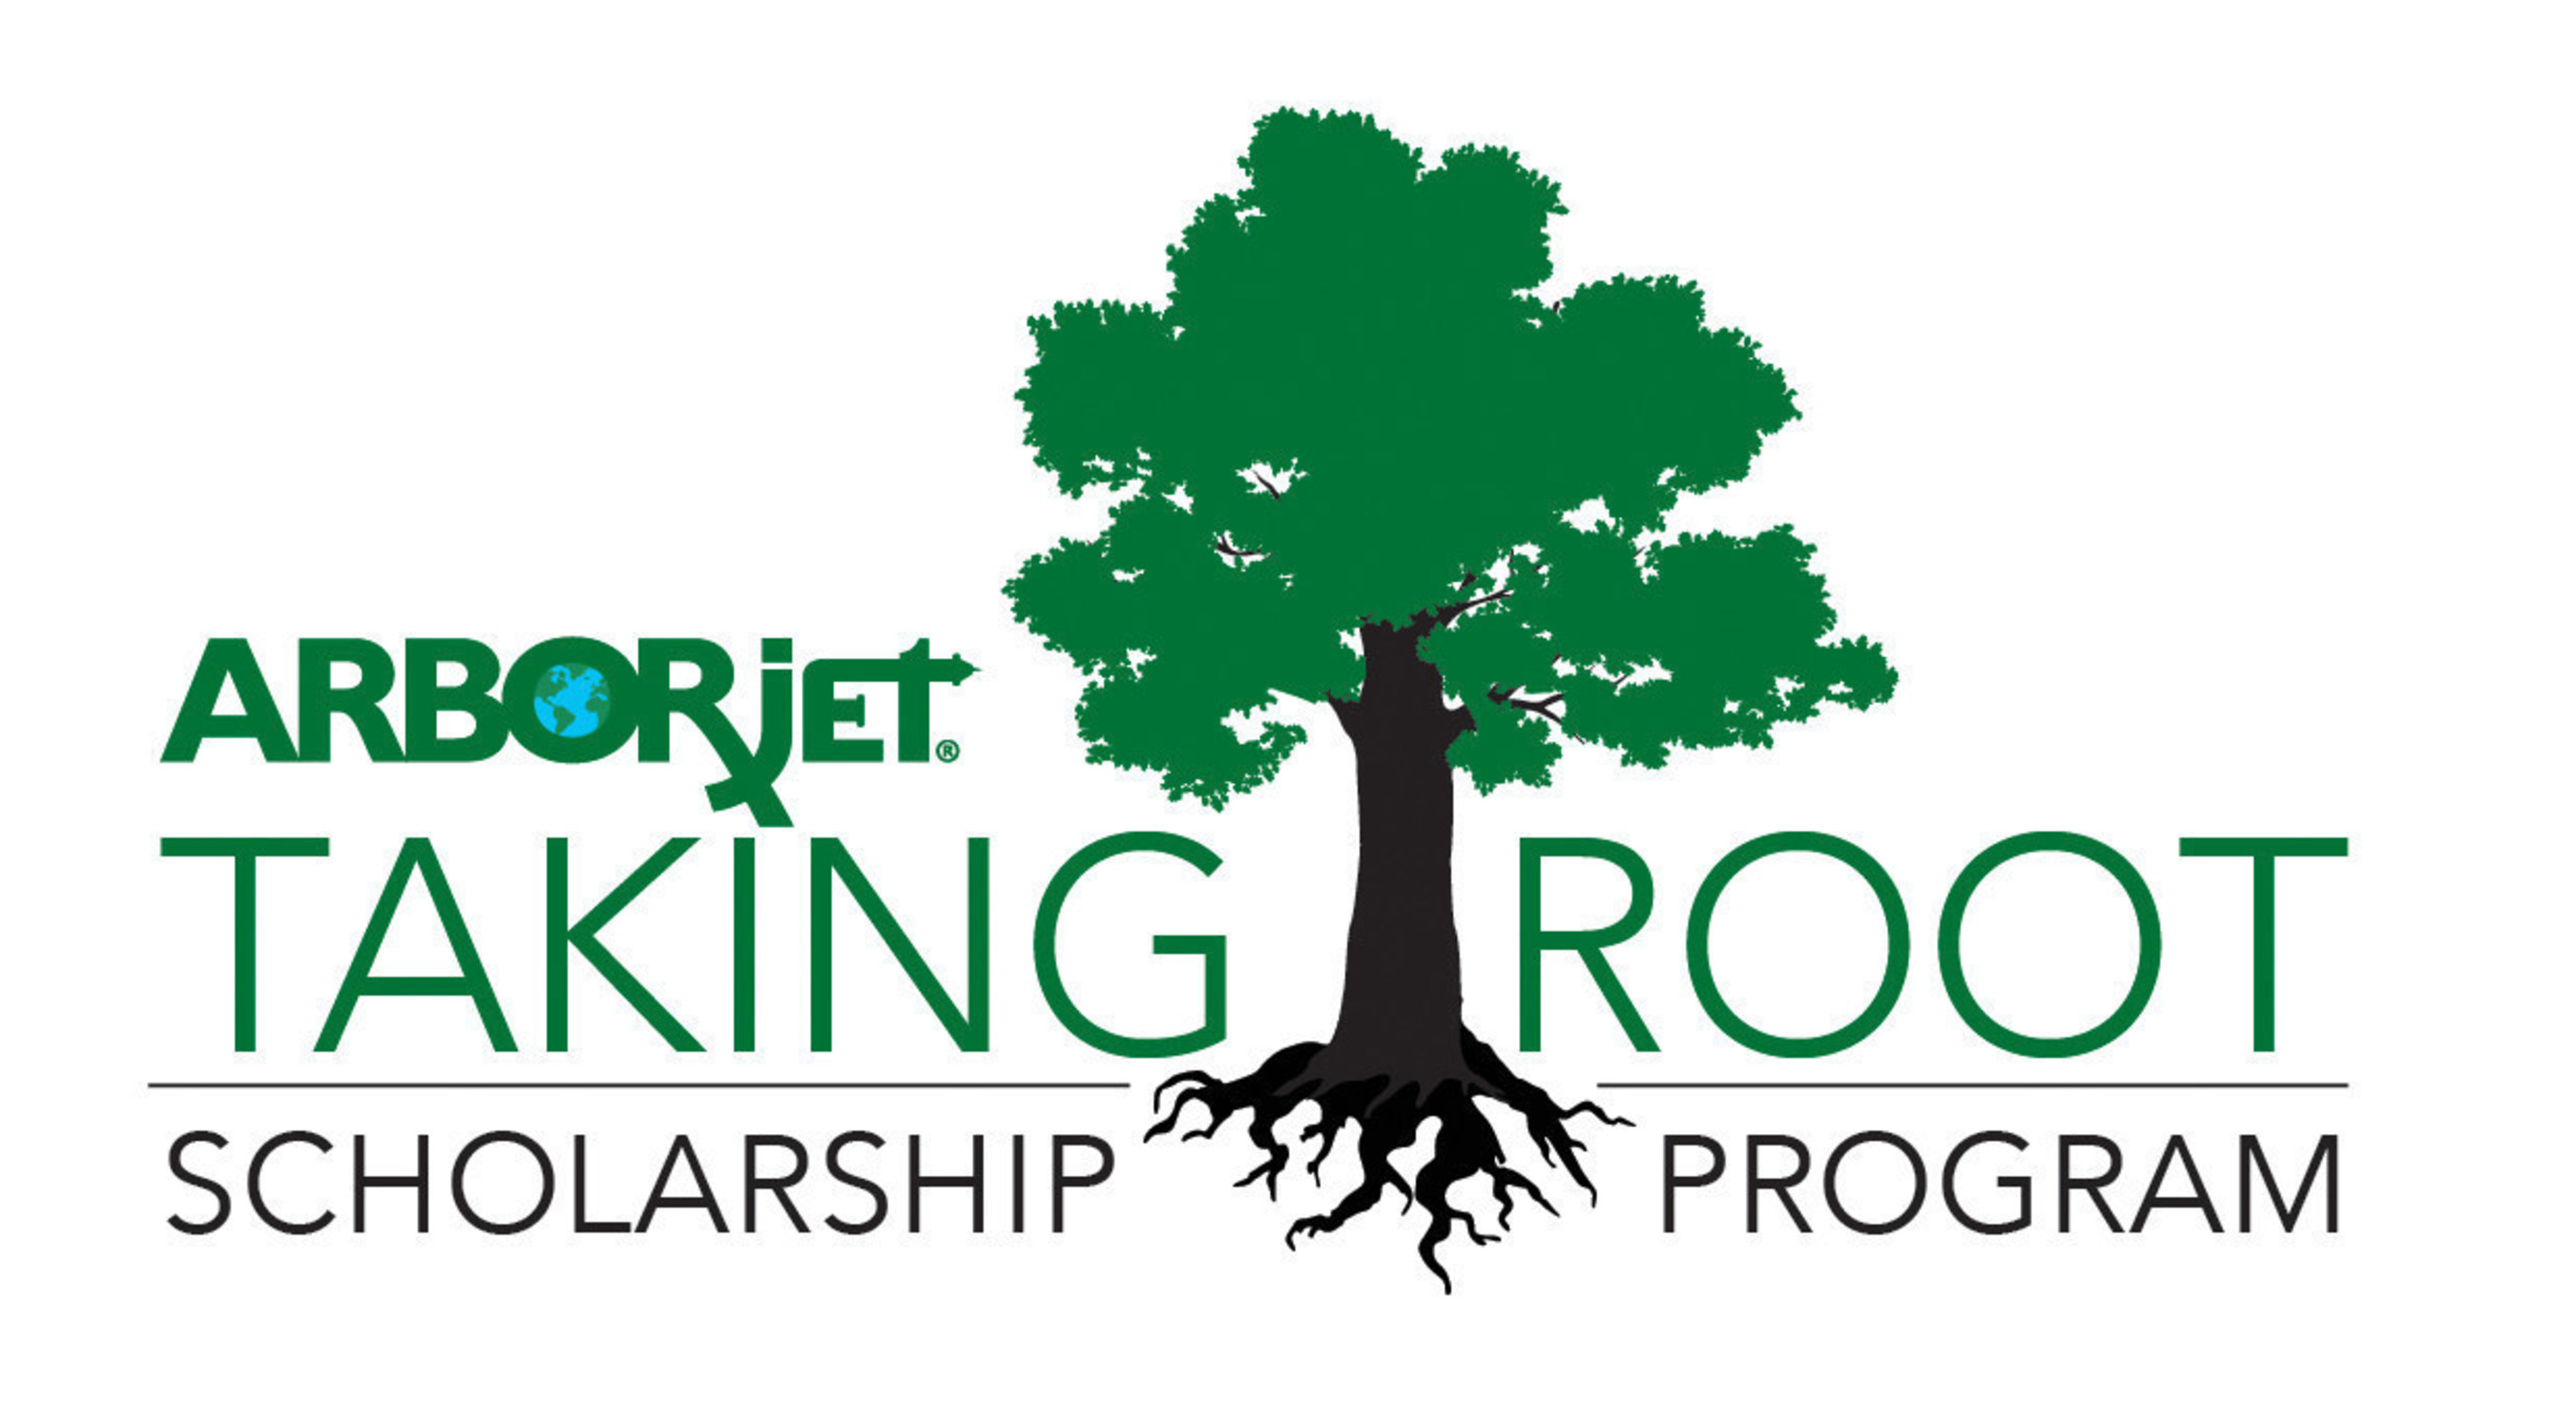 Arborjet, a leader in the care of America's urban and natural forests, is now accepting applications for its 2016 "Taking Root" Scholarship Program. Now in its third year, the scholarship program will award 10 graduating high school seniors each with a $1,000 scholarship to pursue full-time studies in Forestry, Plant Sciences, Horticulture, Entomology, Environmental Science or a related major at an accredited two-year or four-year college. Learn more and apply at http://sms.scholarshipamerica.org/arborjet/